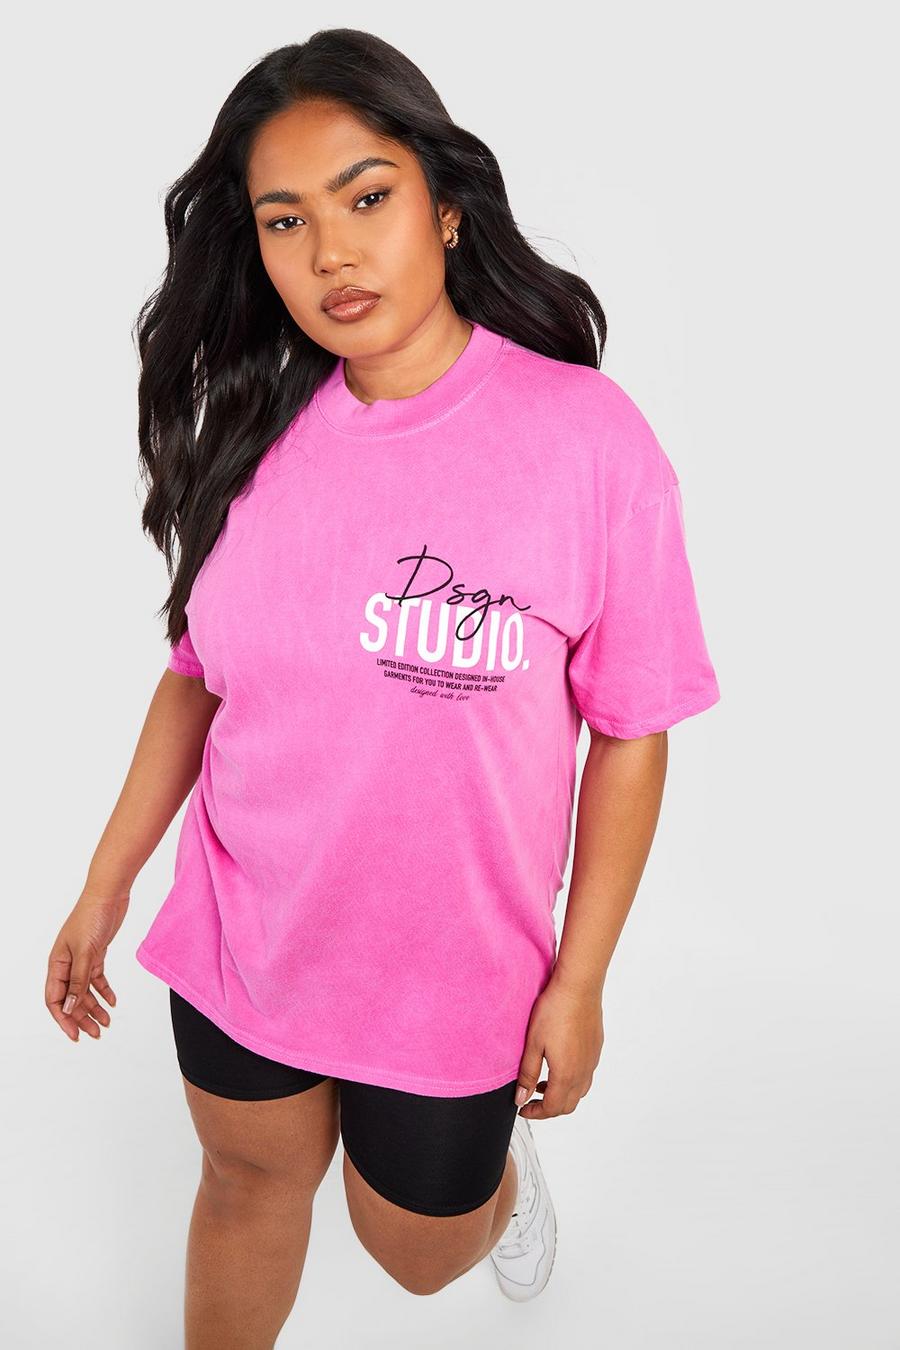 T-shirt Plus Size oversize con stampa Dsgn Studio ad altezza taschino, Hot pink image number 1